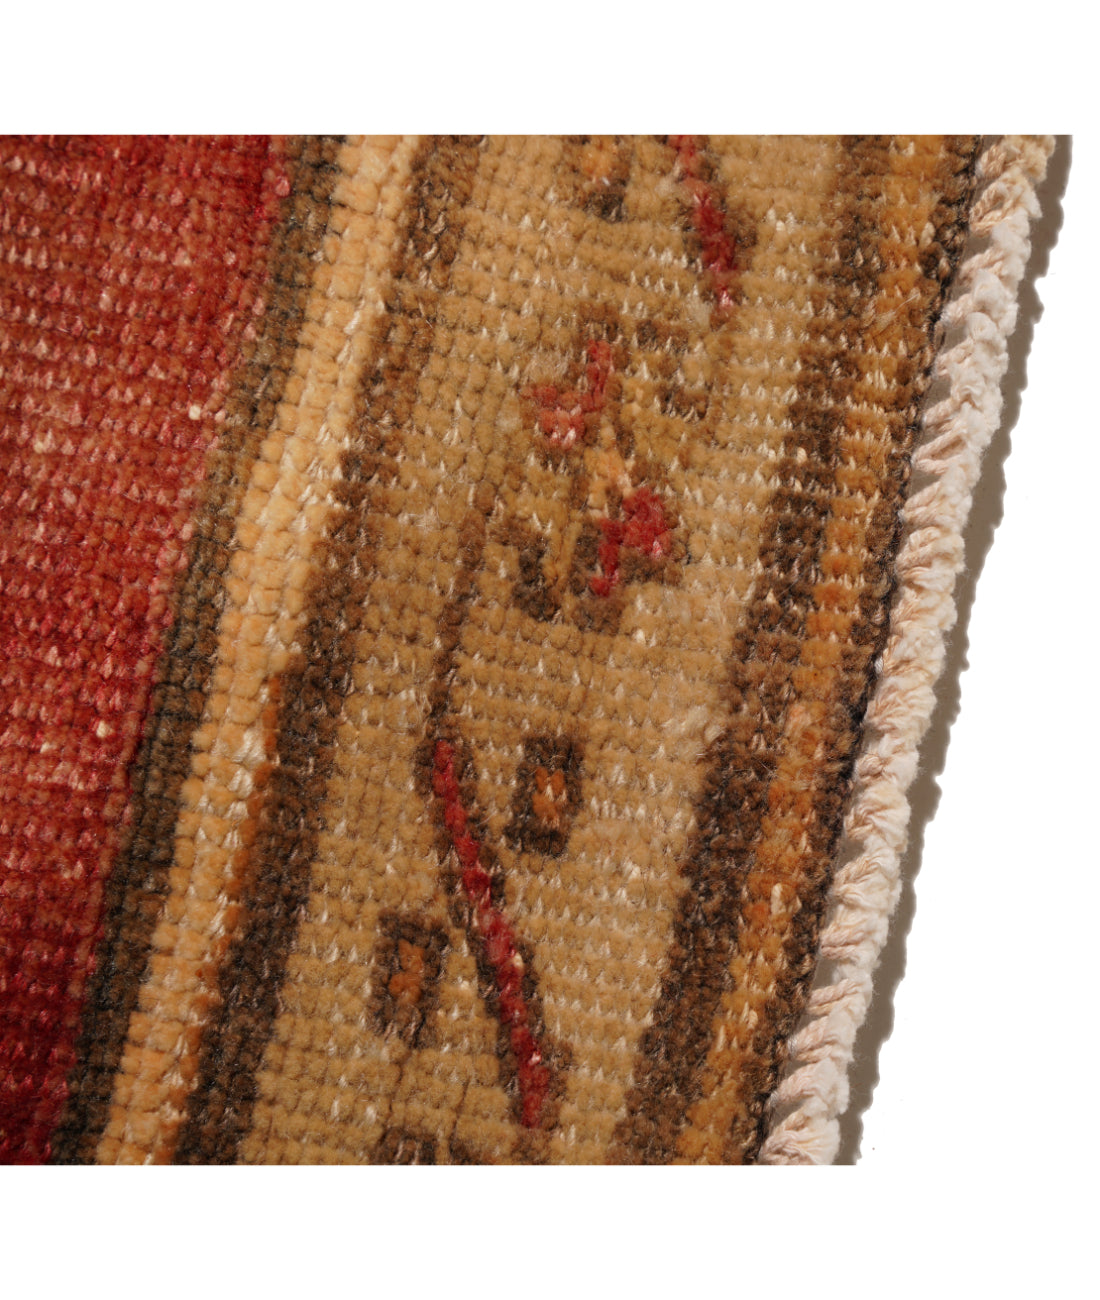 Anatolian 5' 0" X 11' 8" Hand-Knotted Wool Rug 5' 0" X 11' 8" (152 X 356) / Red / Taupe